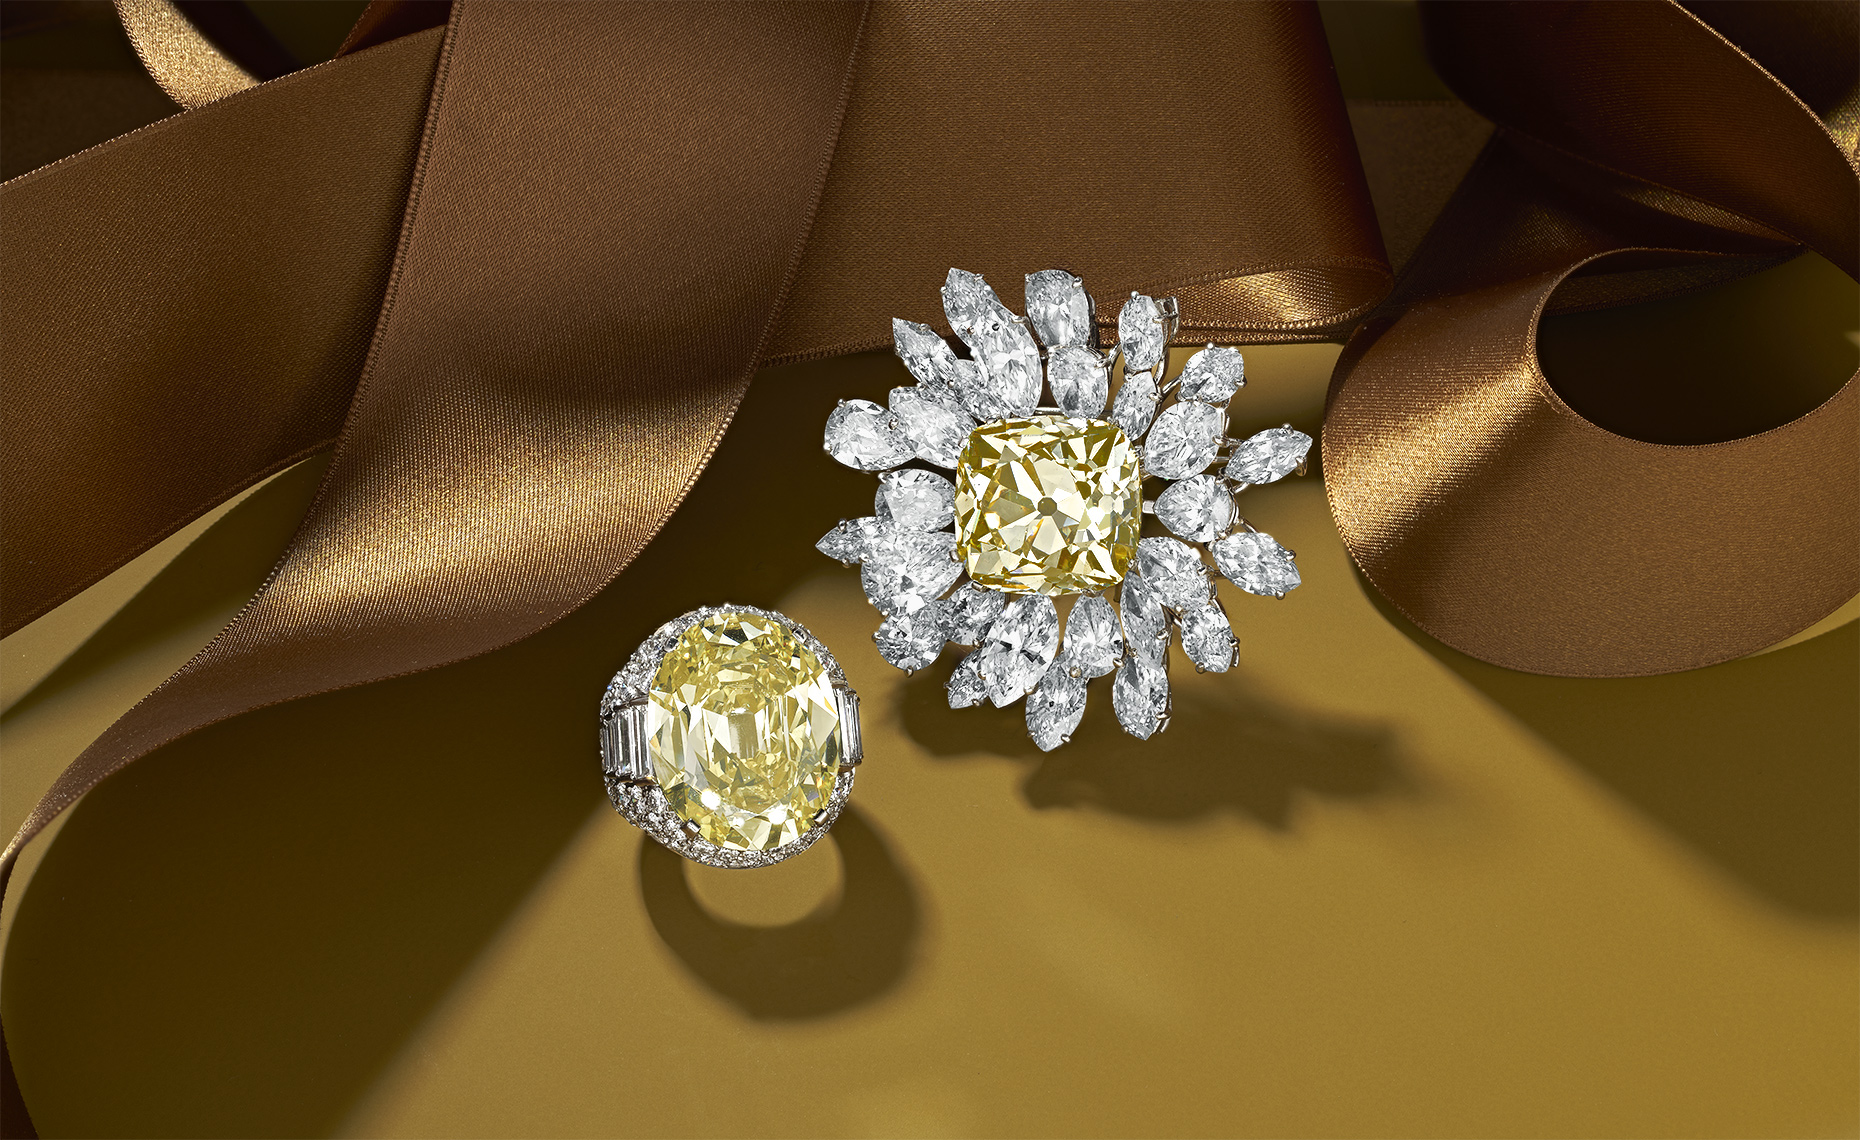 Exquisite yellow diamonds illuminated by the photography of David Lewis Taylor.